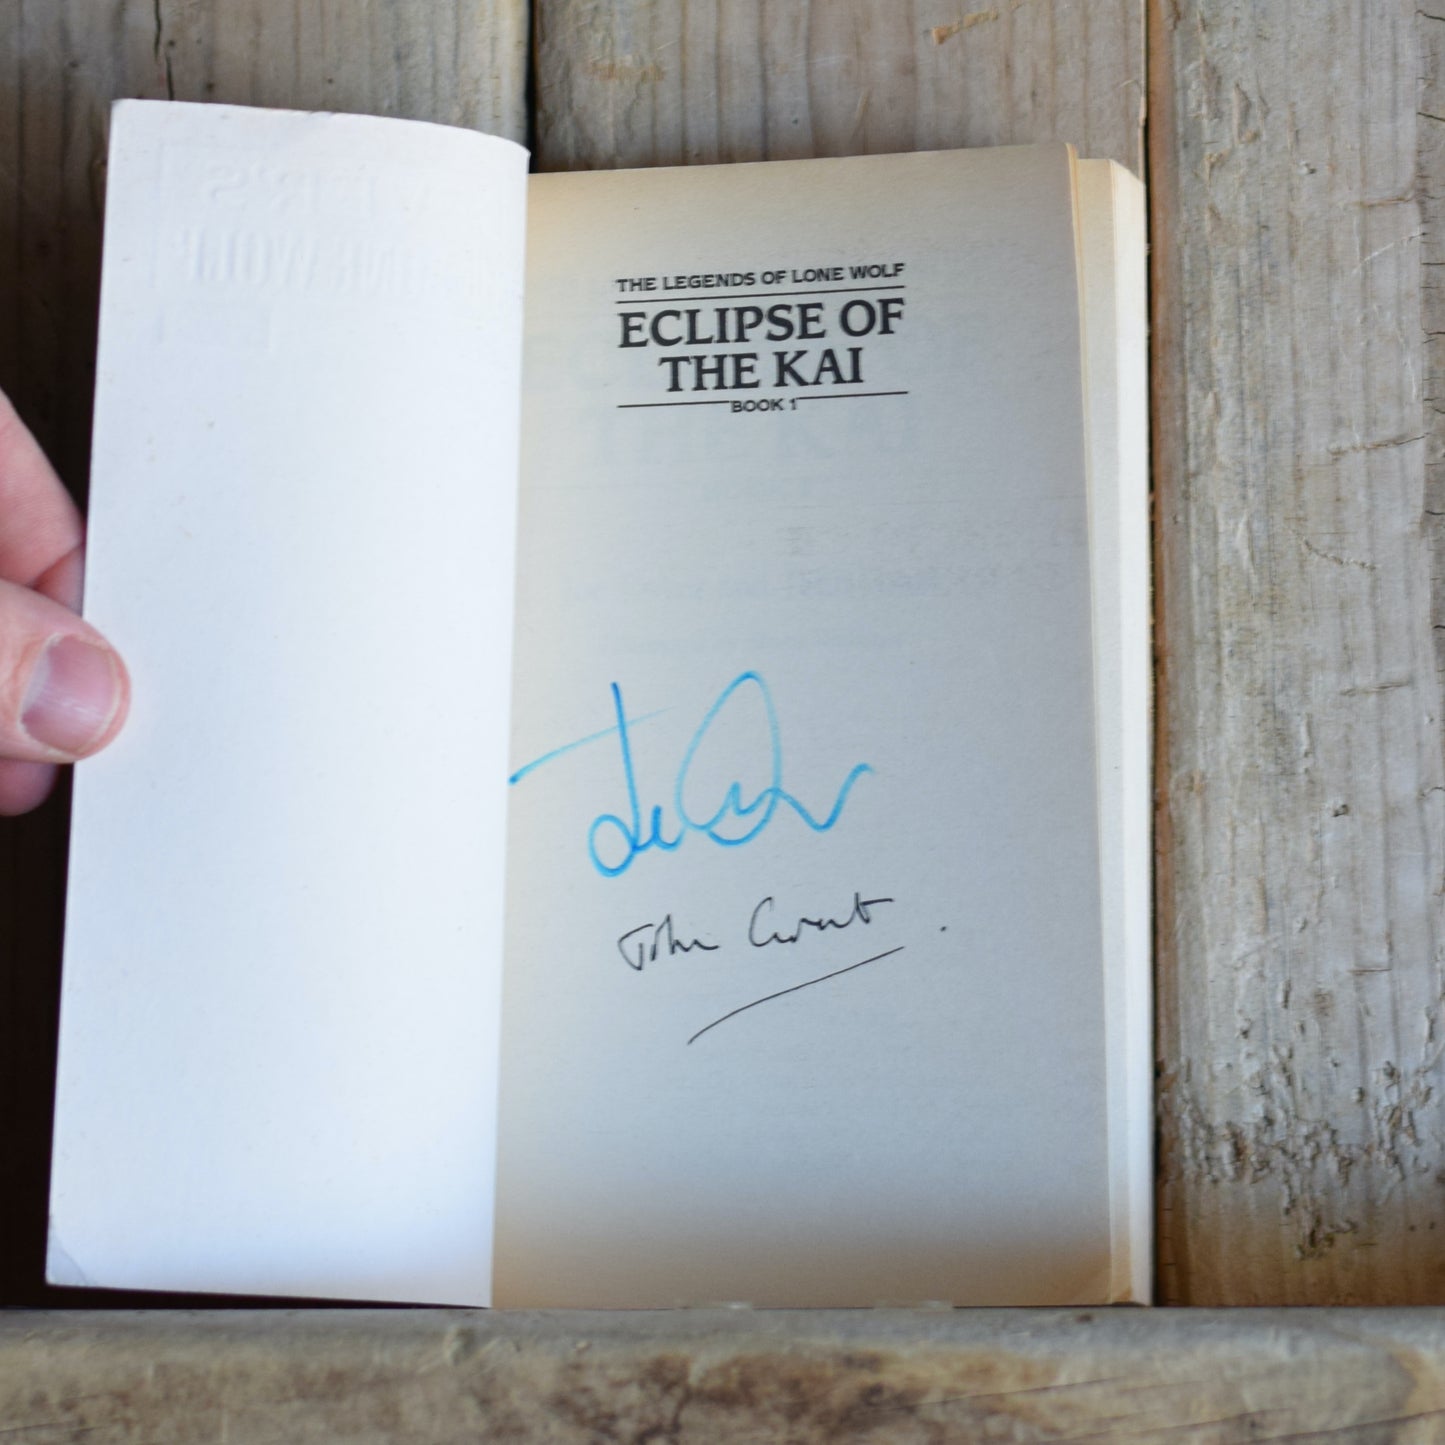 Vintage Fantasy Paperbacks: Joe Dever and John Grant -  Legends of Lone Wolf: Eclipse of the Kai and The Dark Door Opens BOTH DOUBLE SIGNED